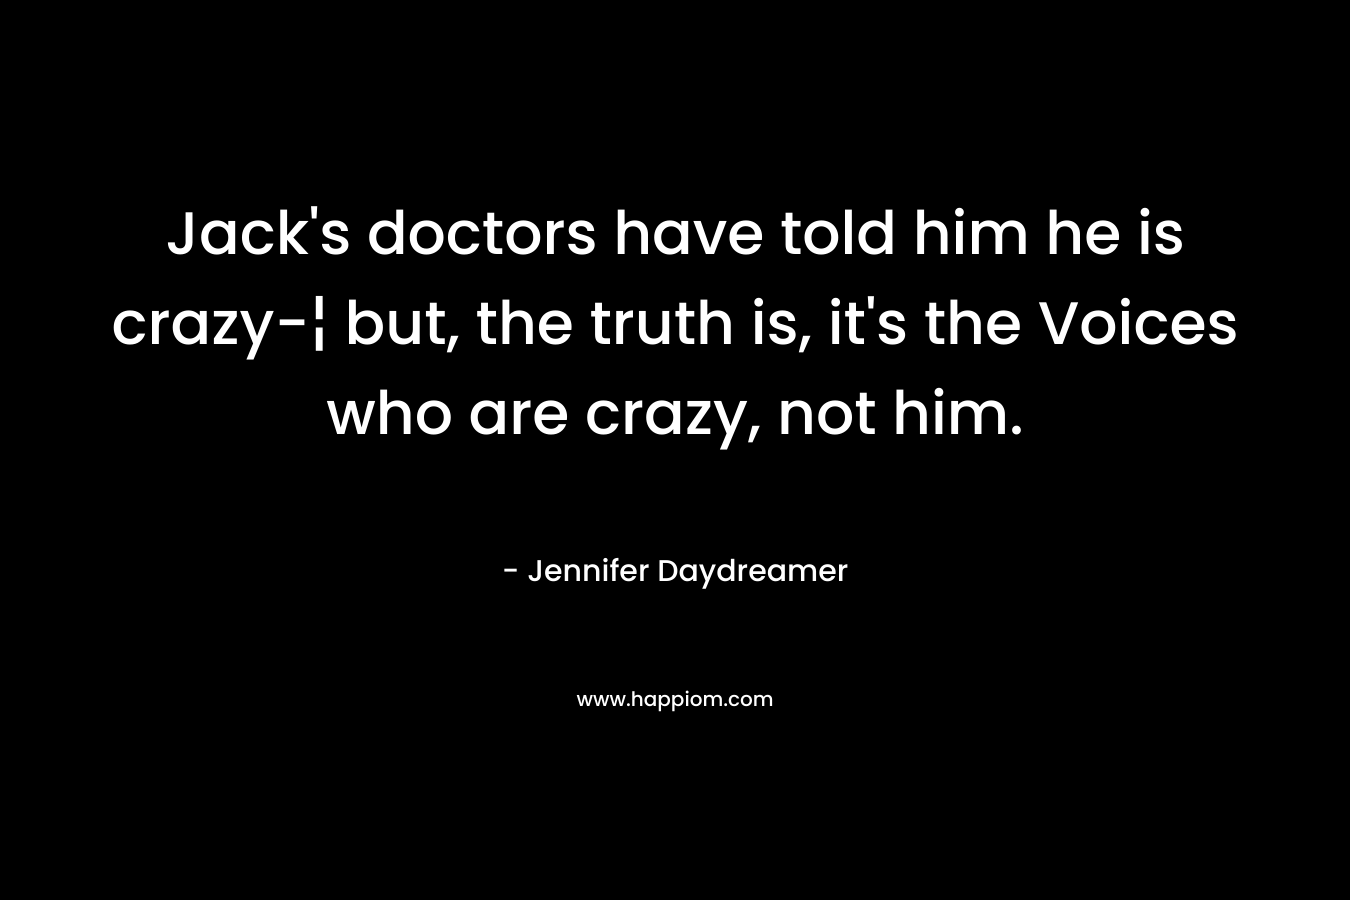 Jack's doctors have told him he is crazy-¦ but, the truth is, it's the Voices who are crazy, not him.